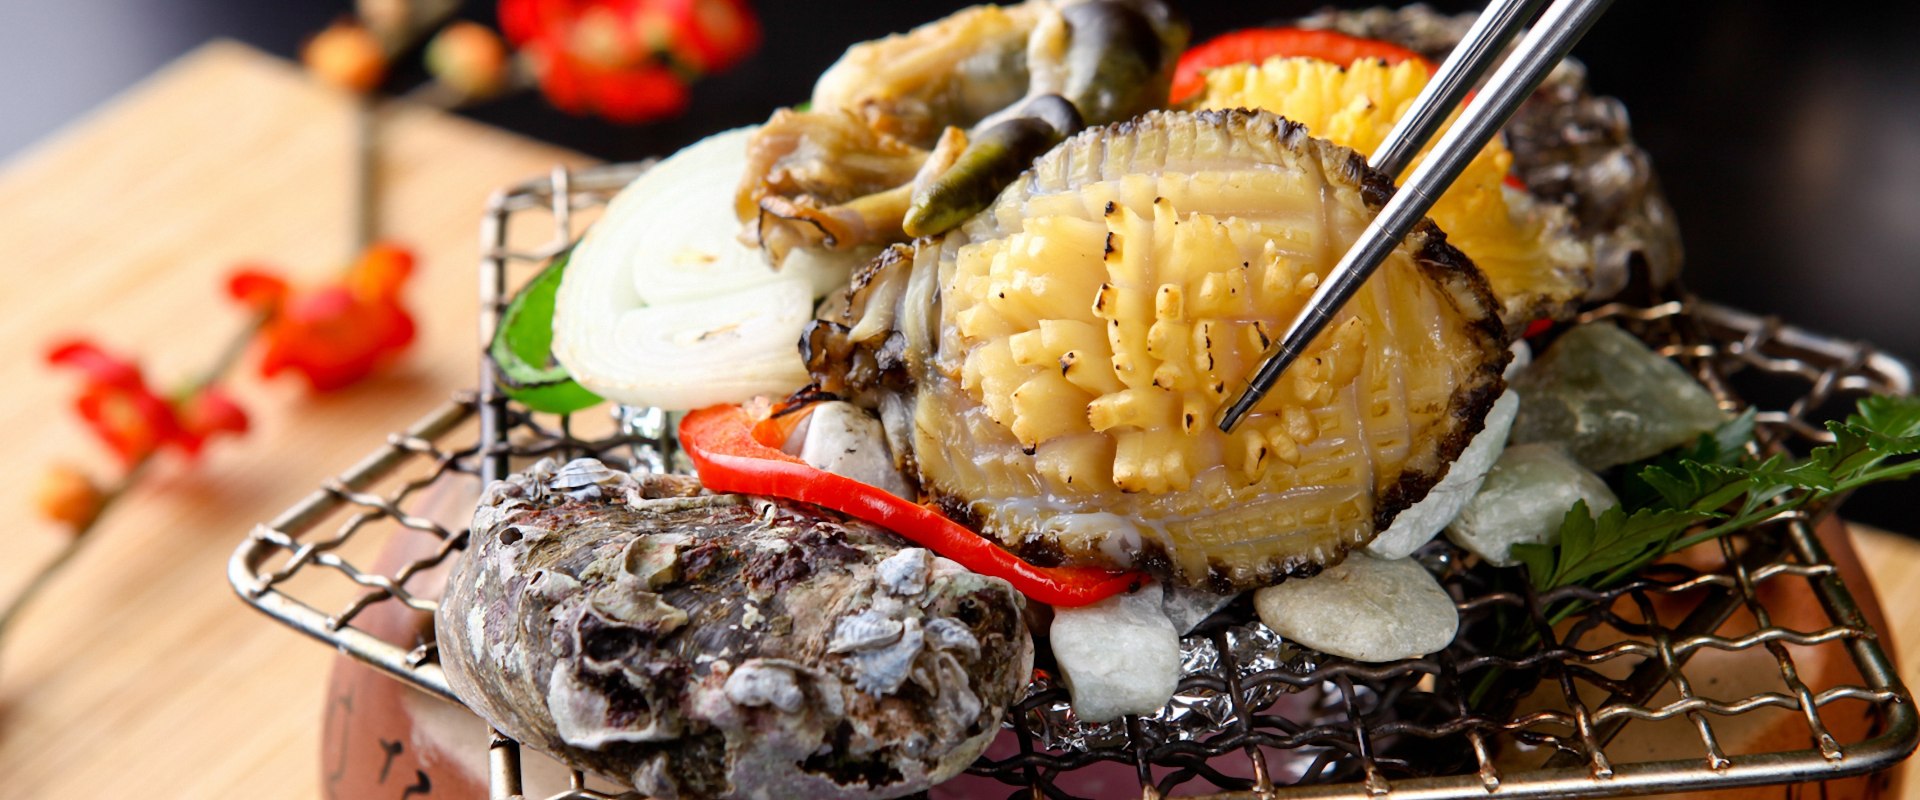 Abalone Culinary Trends: From Traditional Delicacy to Modern Gastronomy